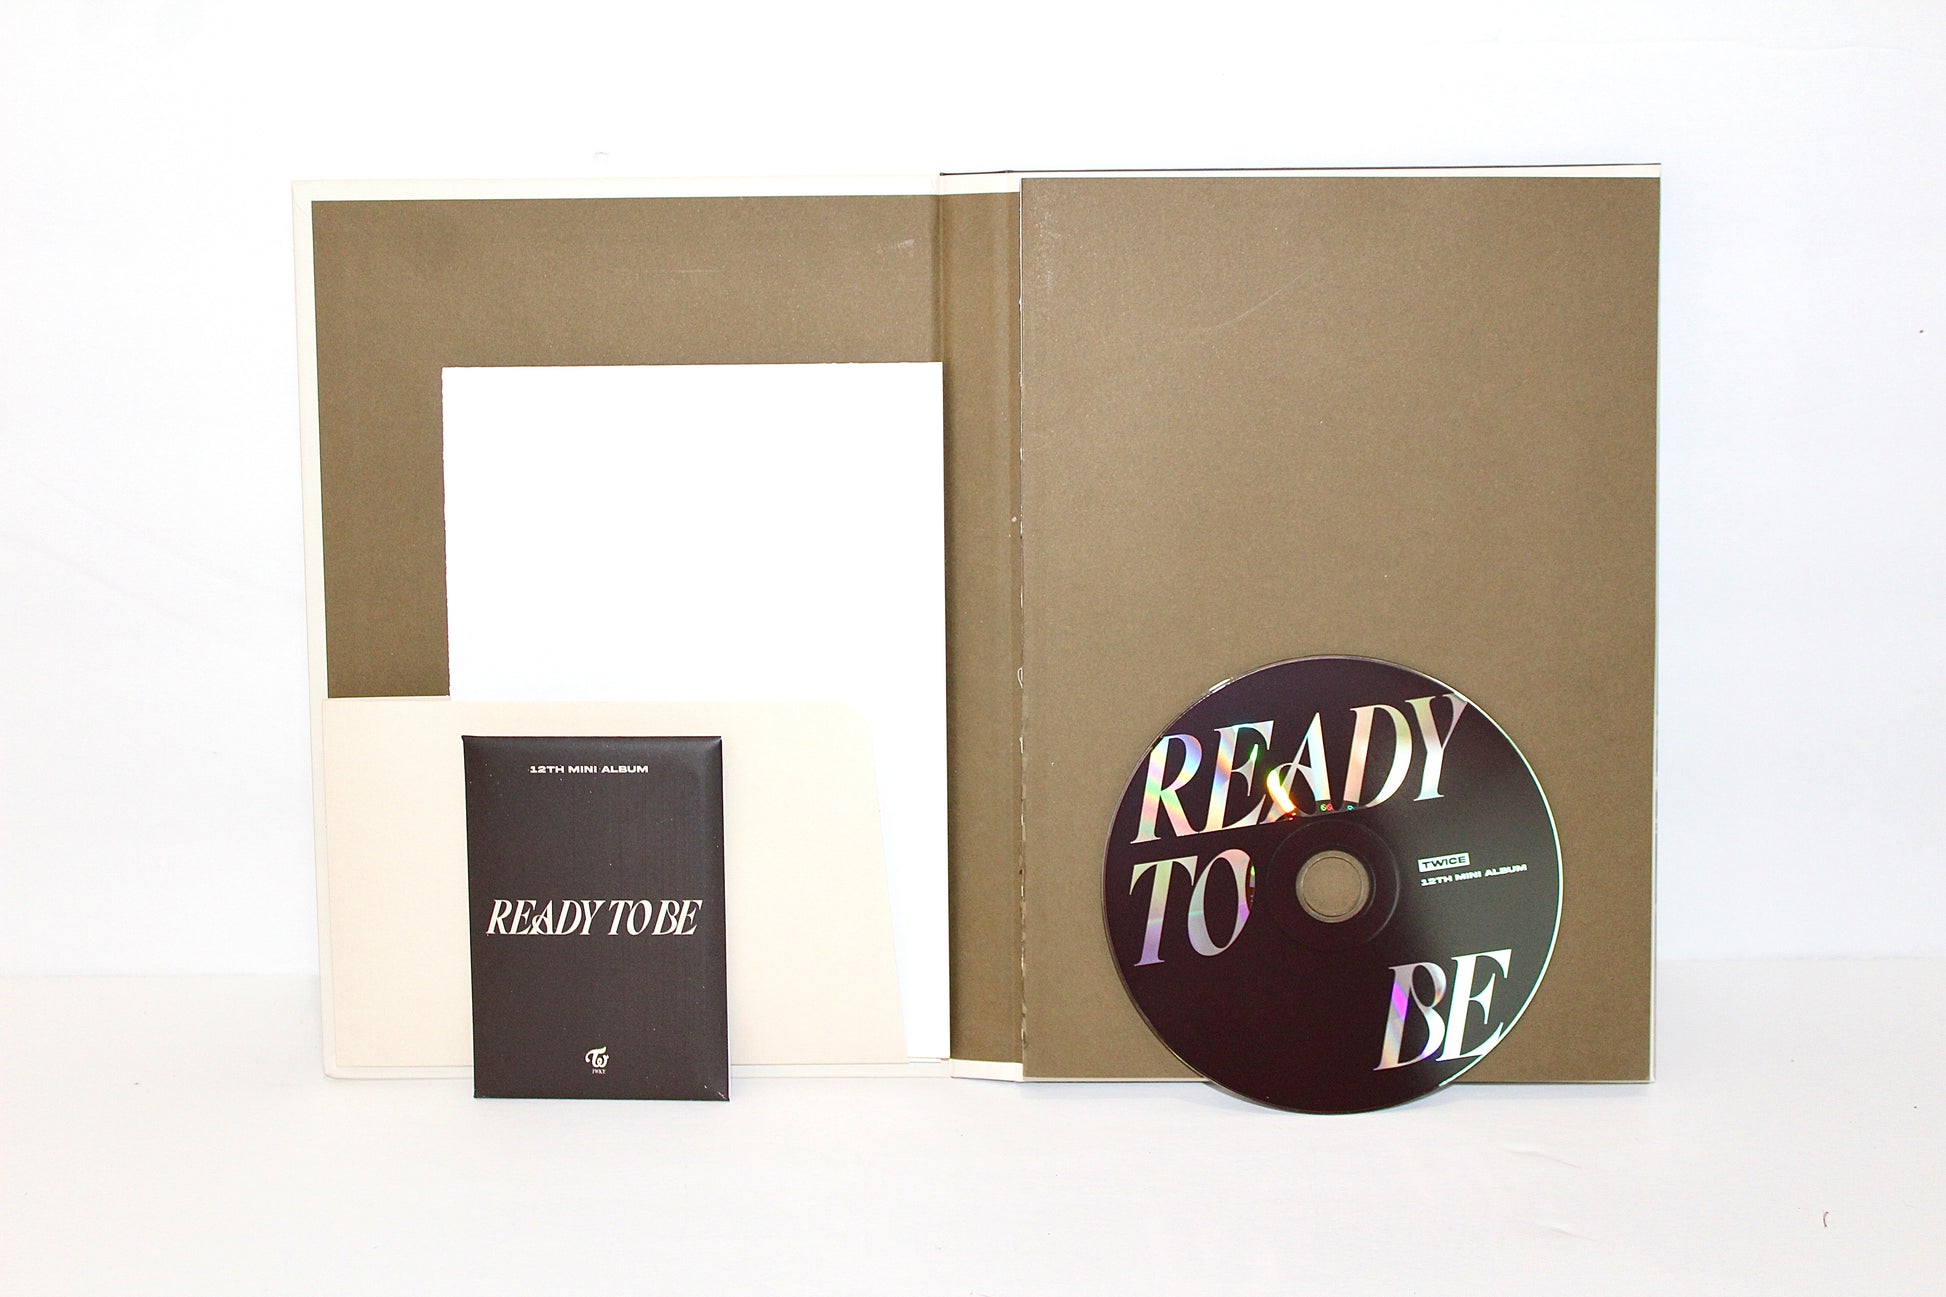 Twice - READY TO BE (READY version) - CD 